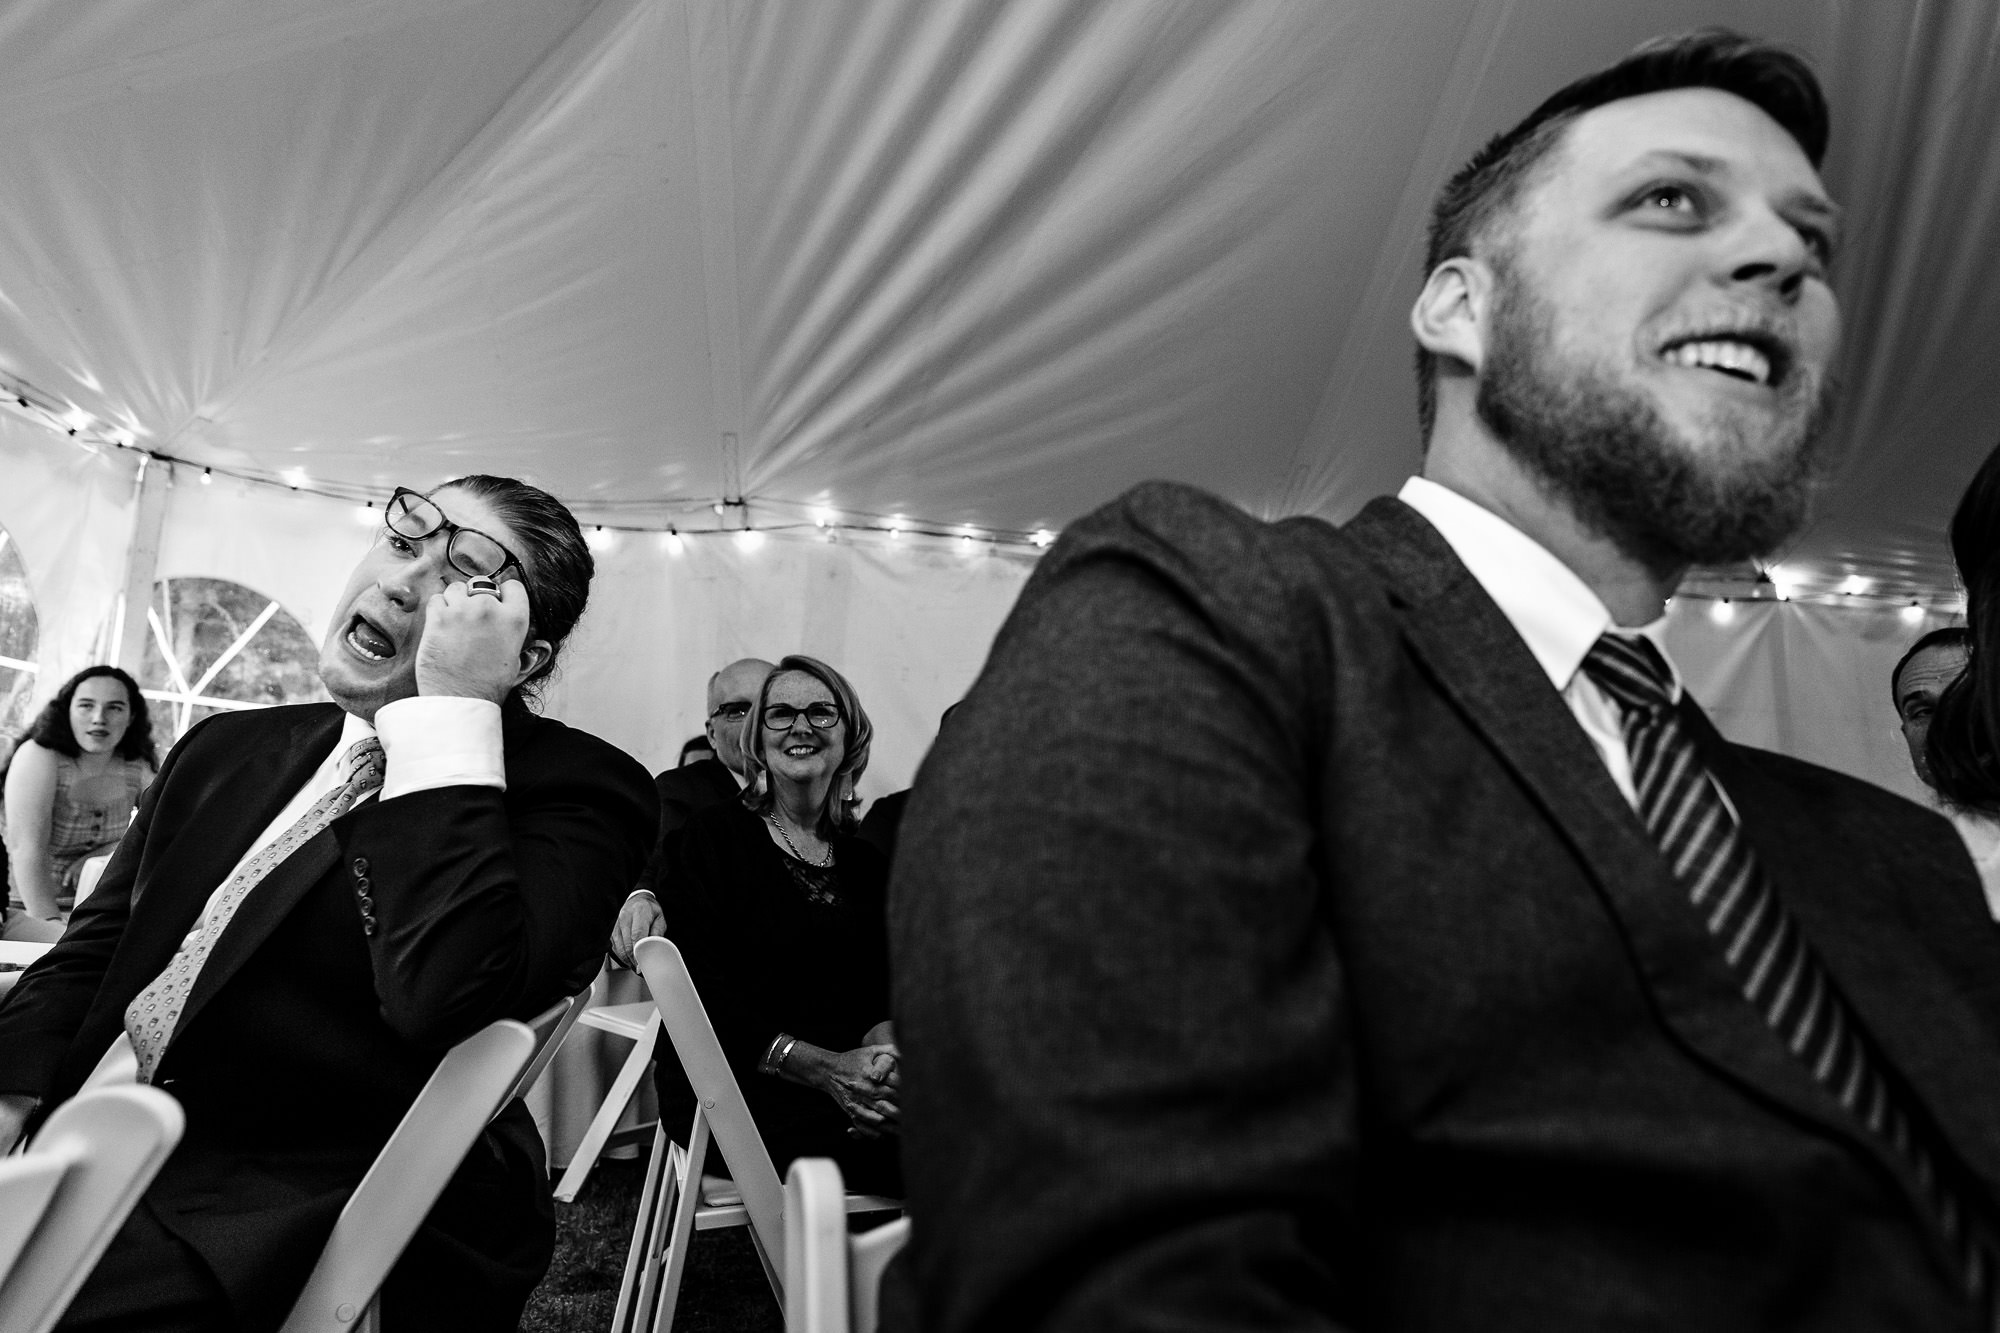 The bride and groom listen to emotional toasts during their Sugarloaf Mountain wedding in western Maine.